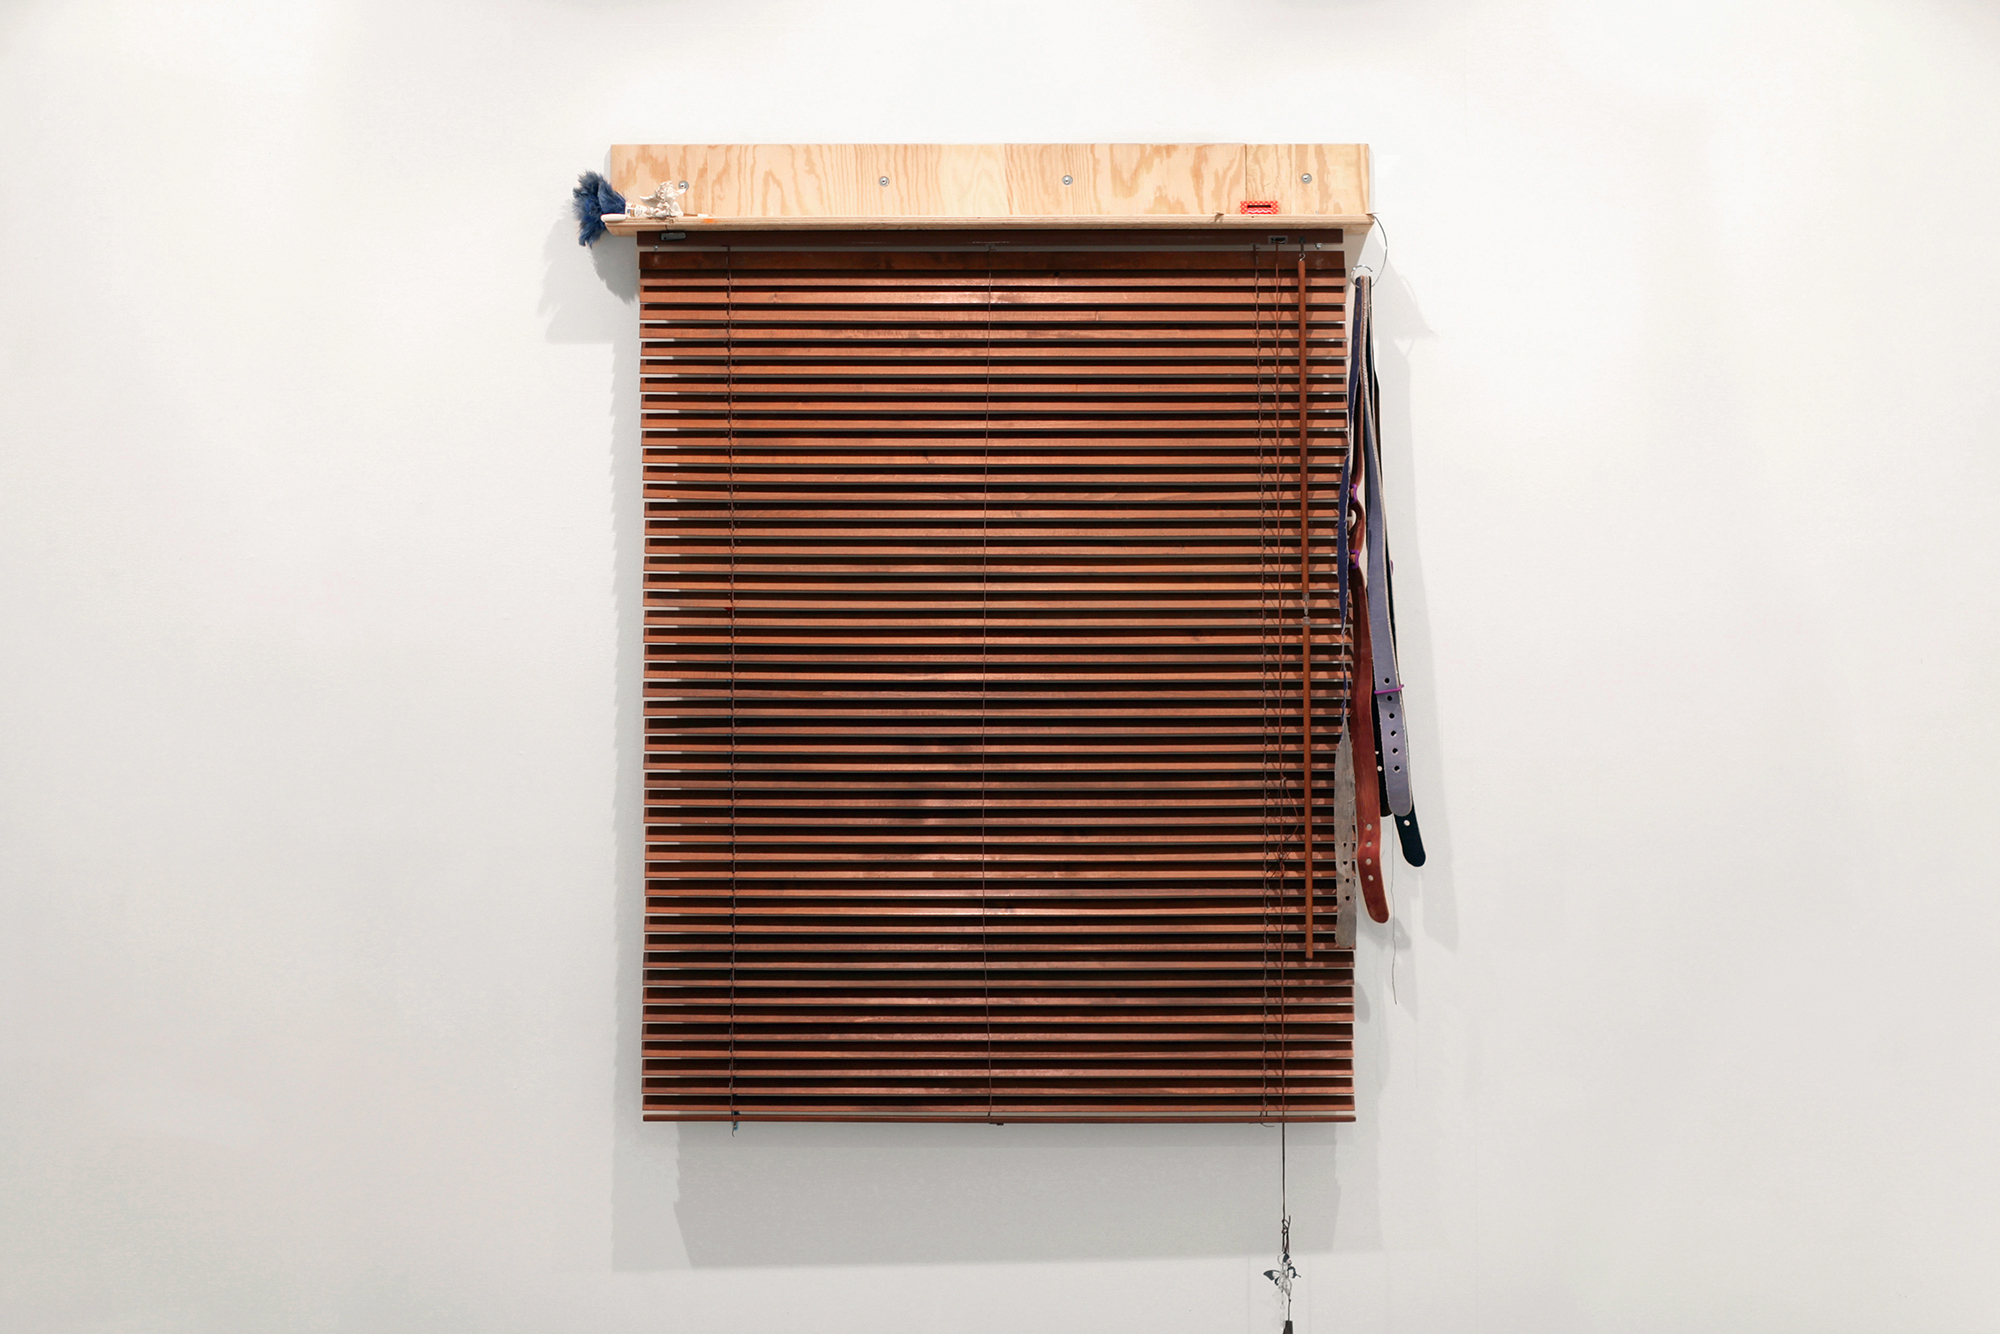 Jonas Morgenthaler, It’s A Fine Day, People Look Out Windows, 2022, pine wood, selfadhesive marble imitation foil, wooden blinds, found objects, 165 × 135 x 15 cm